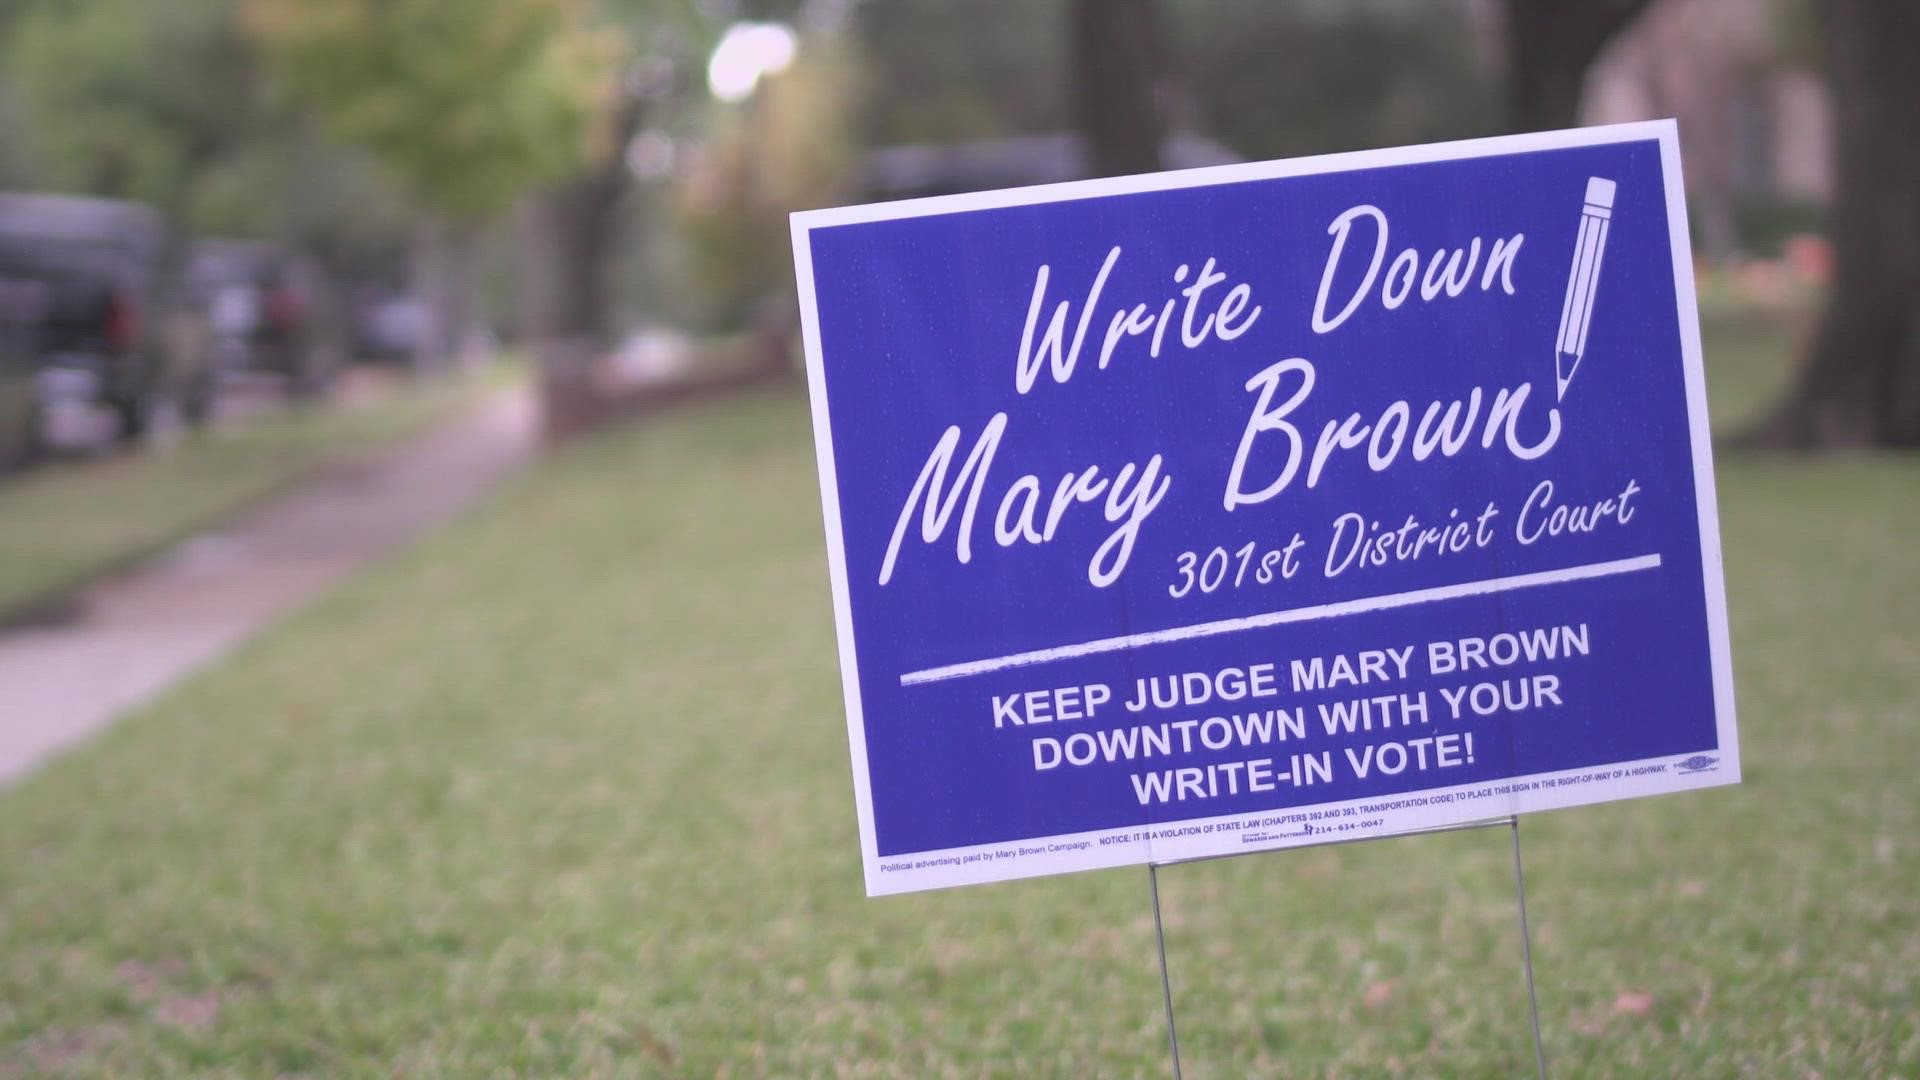 Incumbent Judge Mary Brown admits a mistake kept her name off the ballot. She, and two other candidates, are vying to have write-in campaigns put them on the bench.